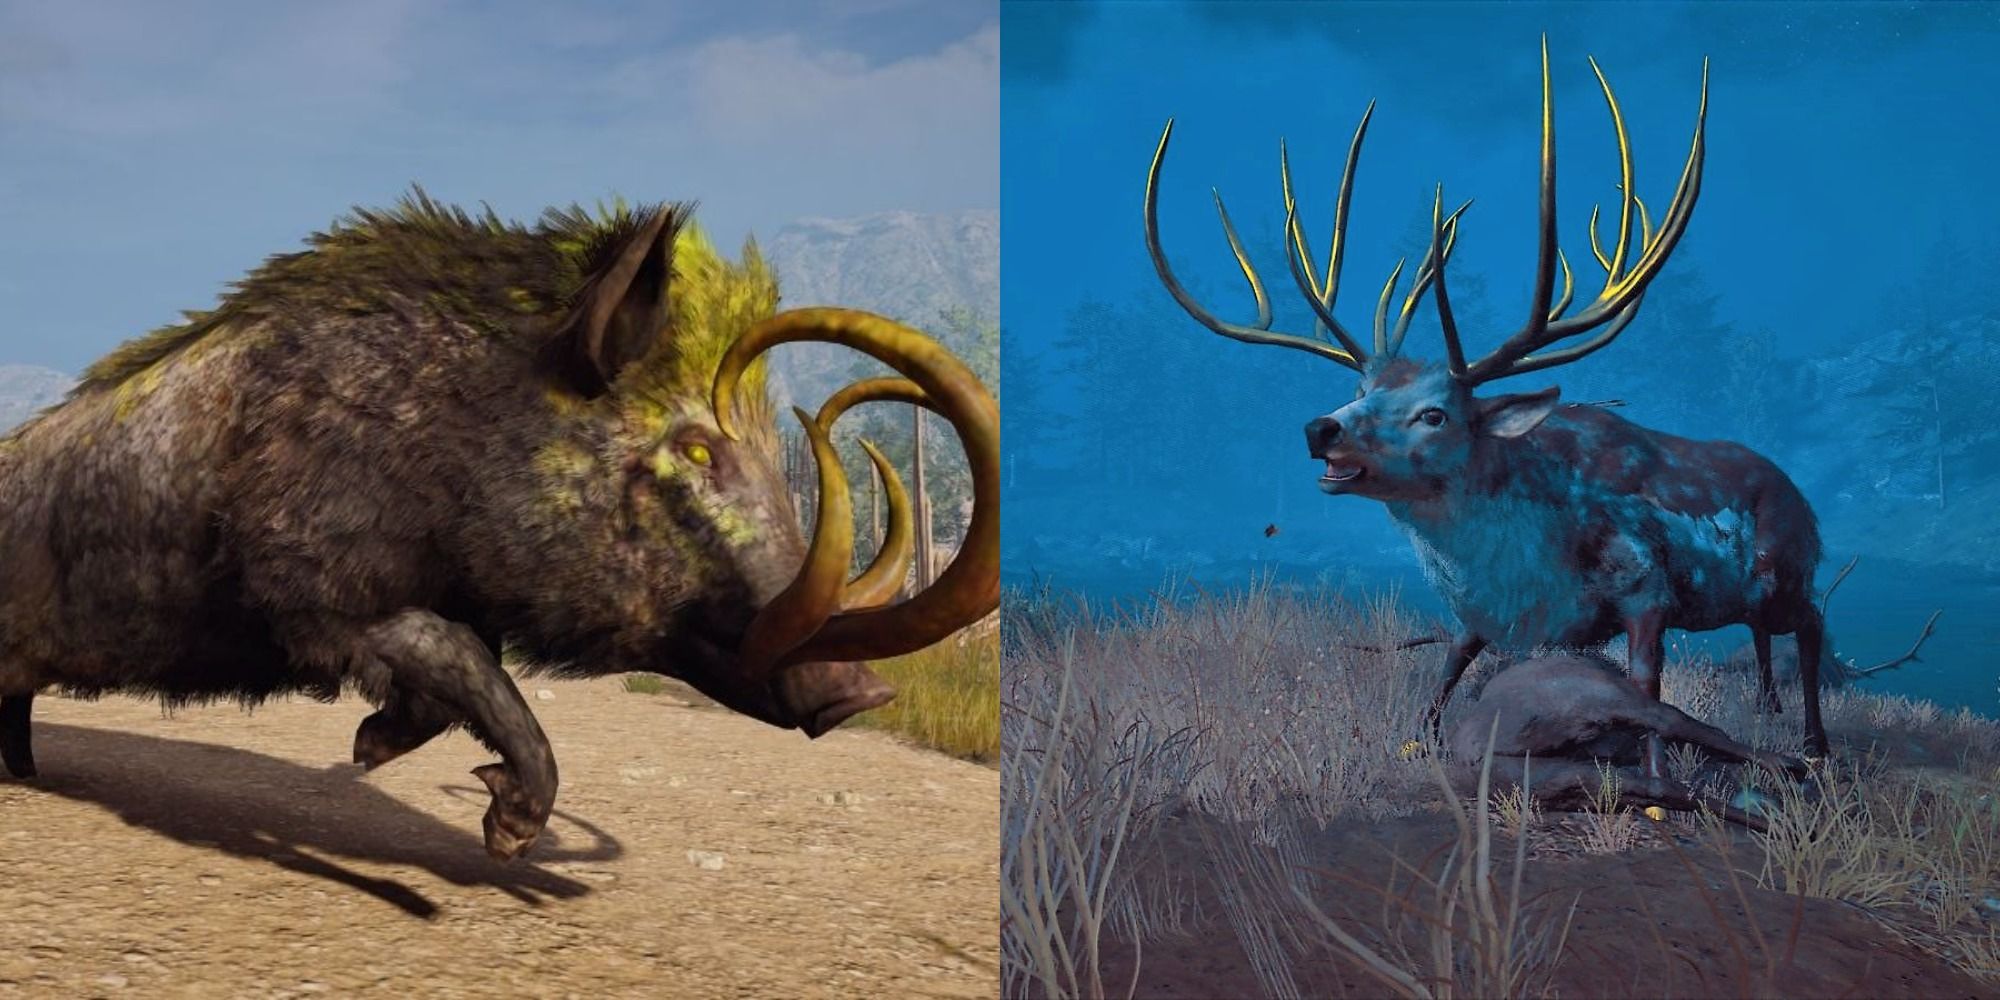 Split image showing the Erymanthian Boar and the Hind of Keryneia in Assassin's Creed Odyssey.